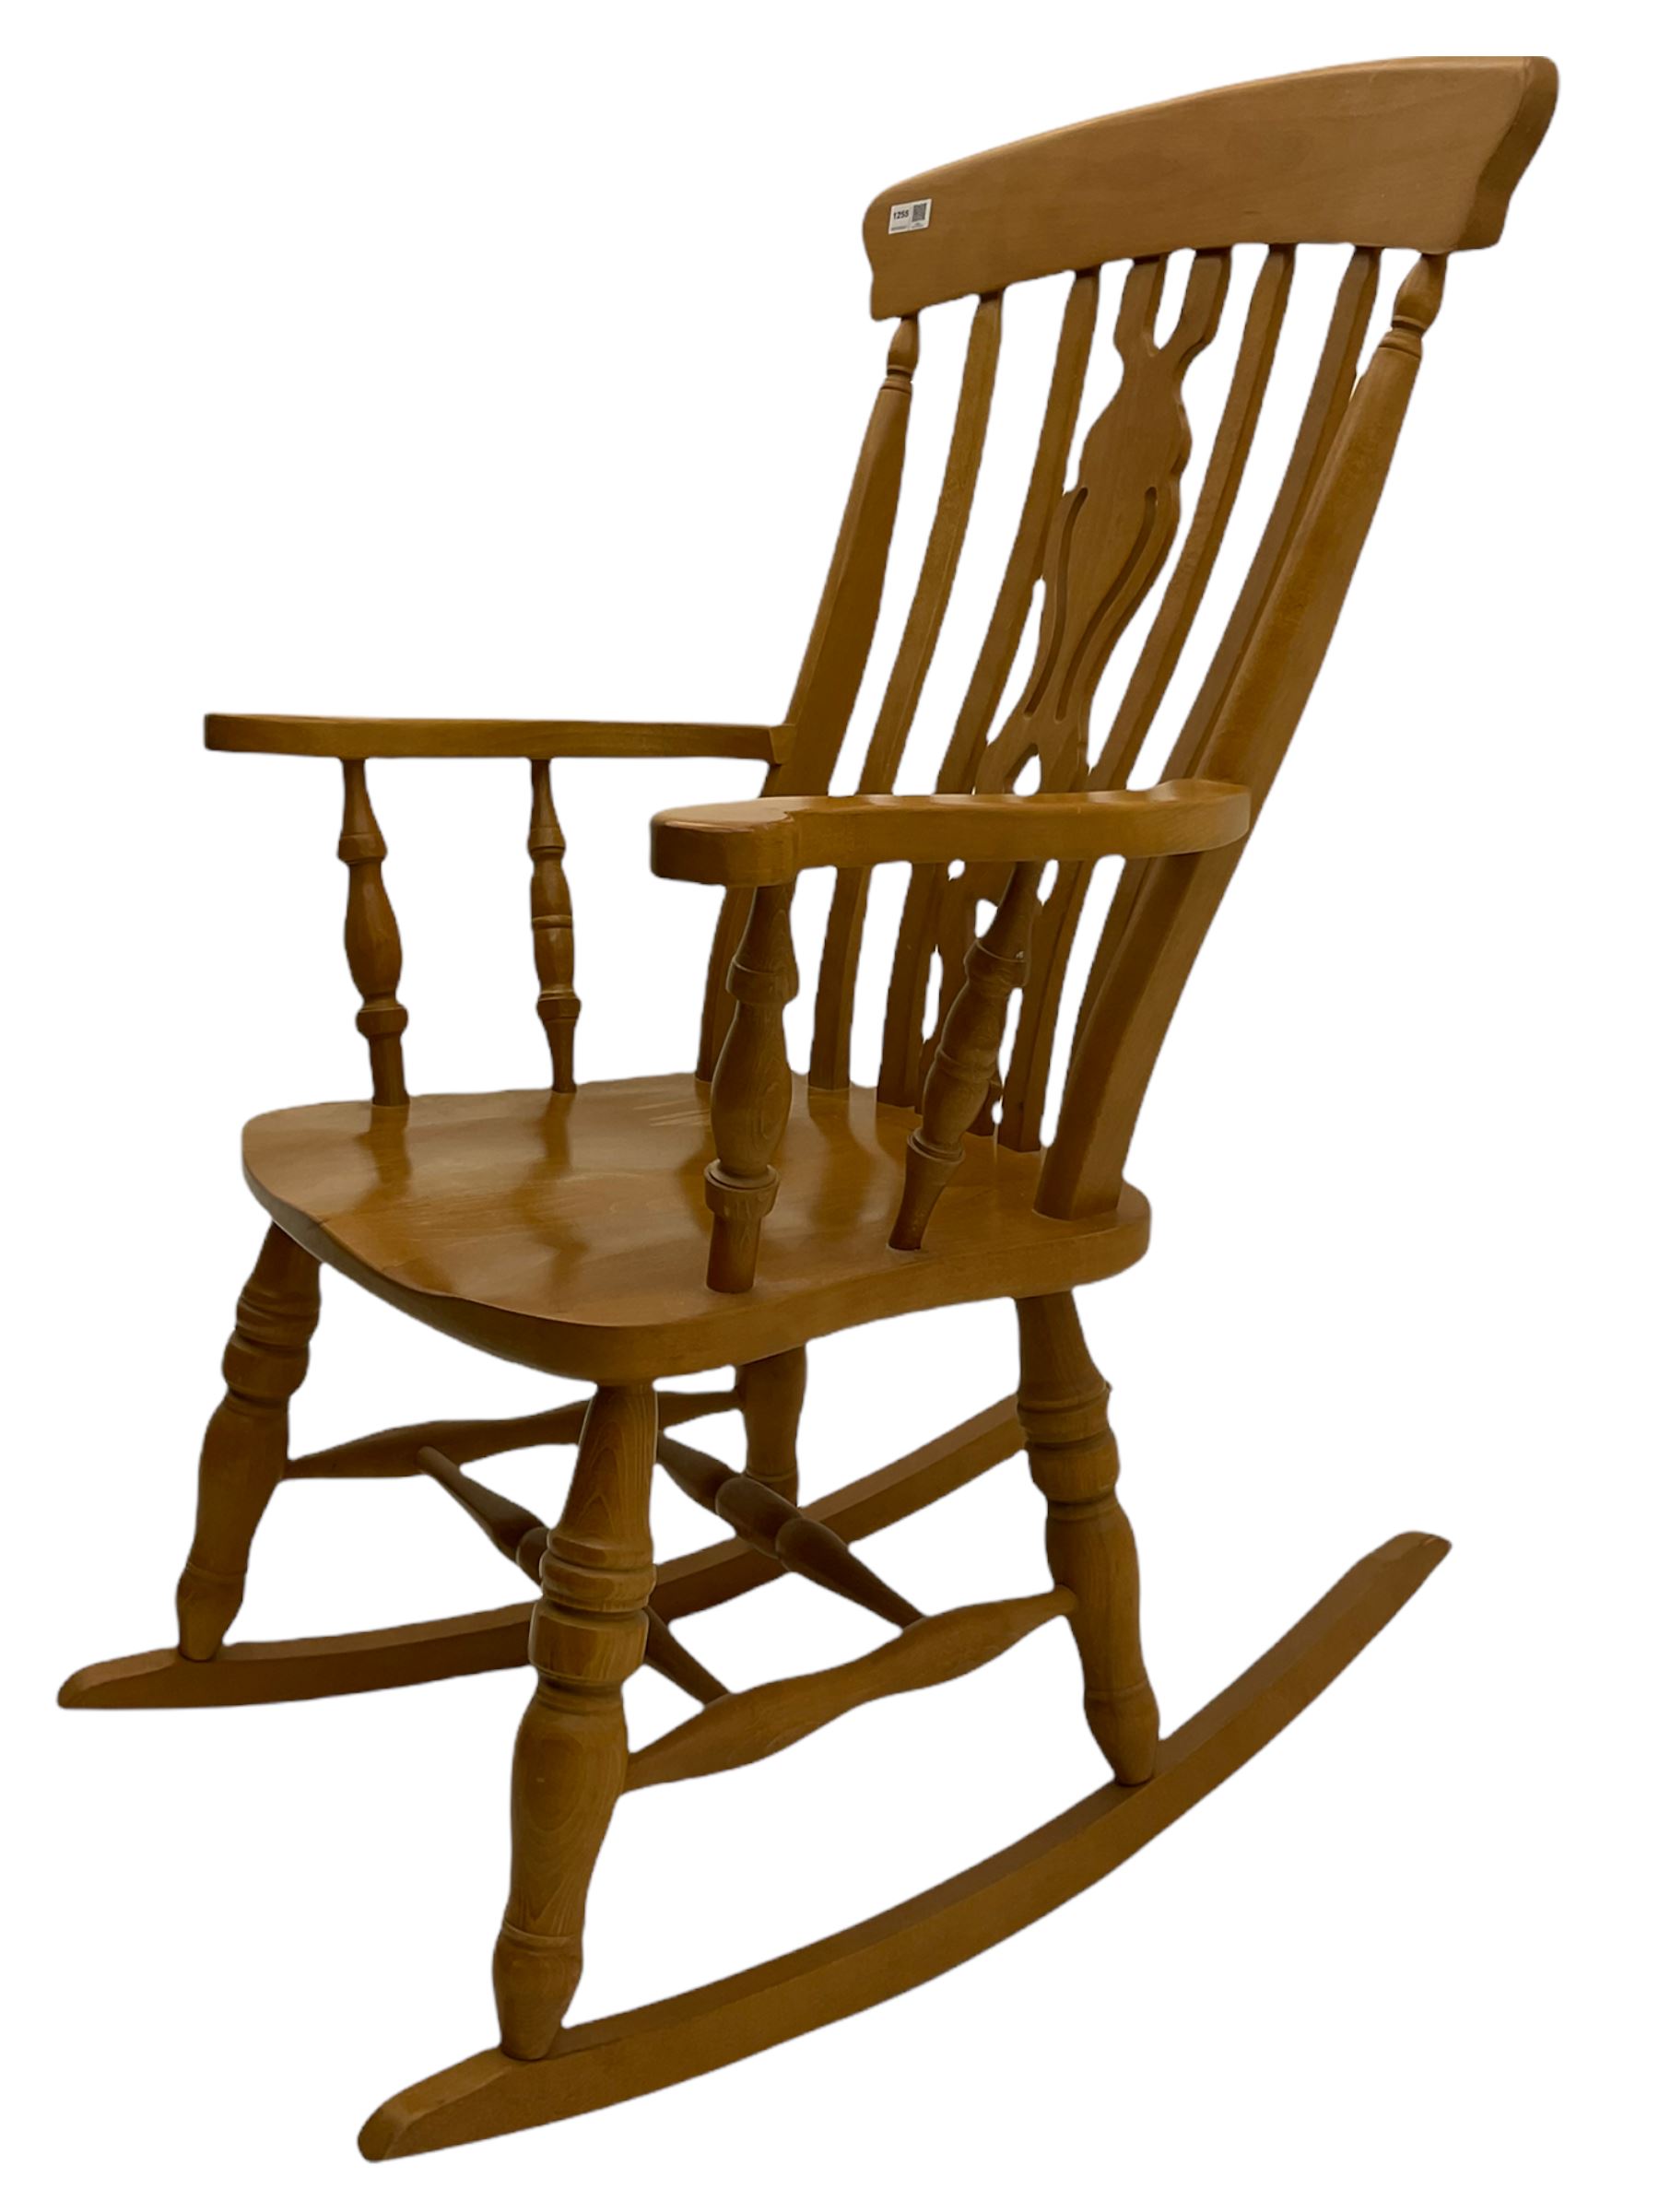 Solid beech farmhouse rocking chair - Image 3 of 6